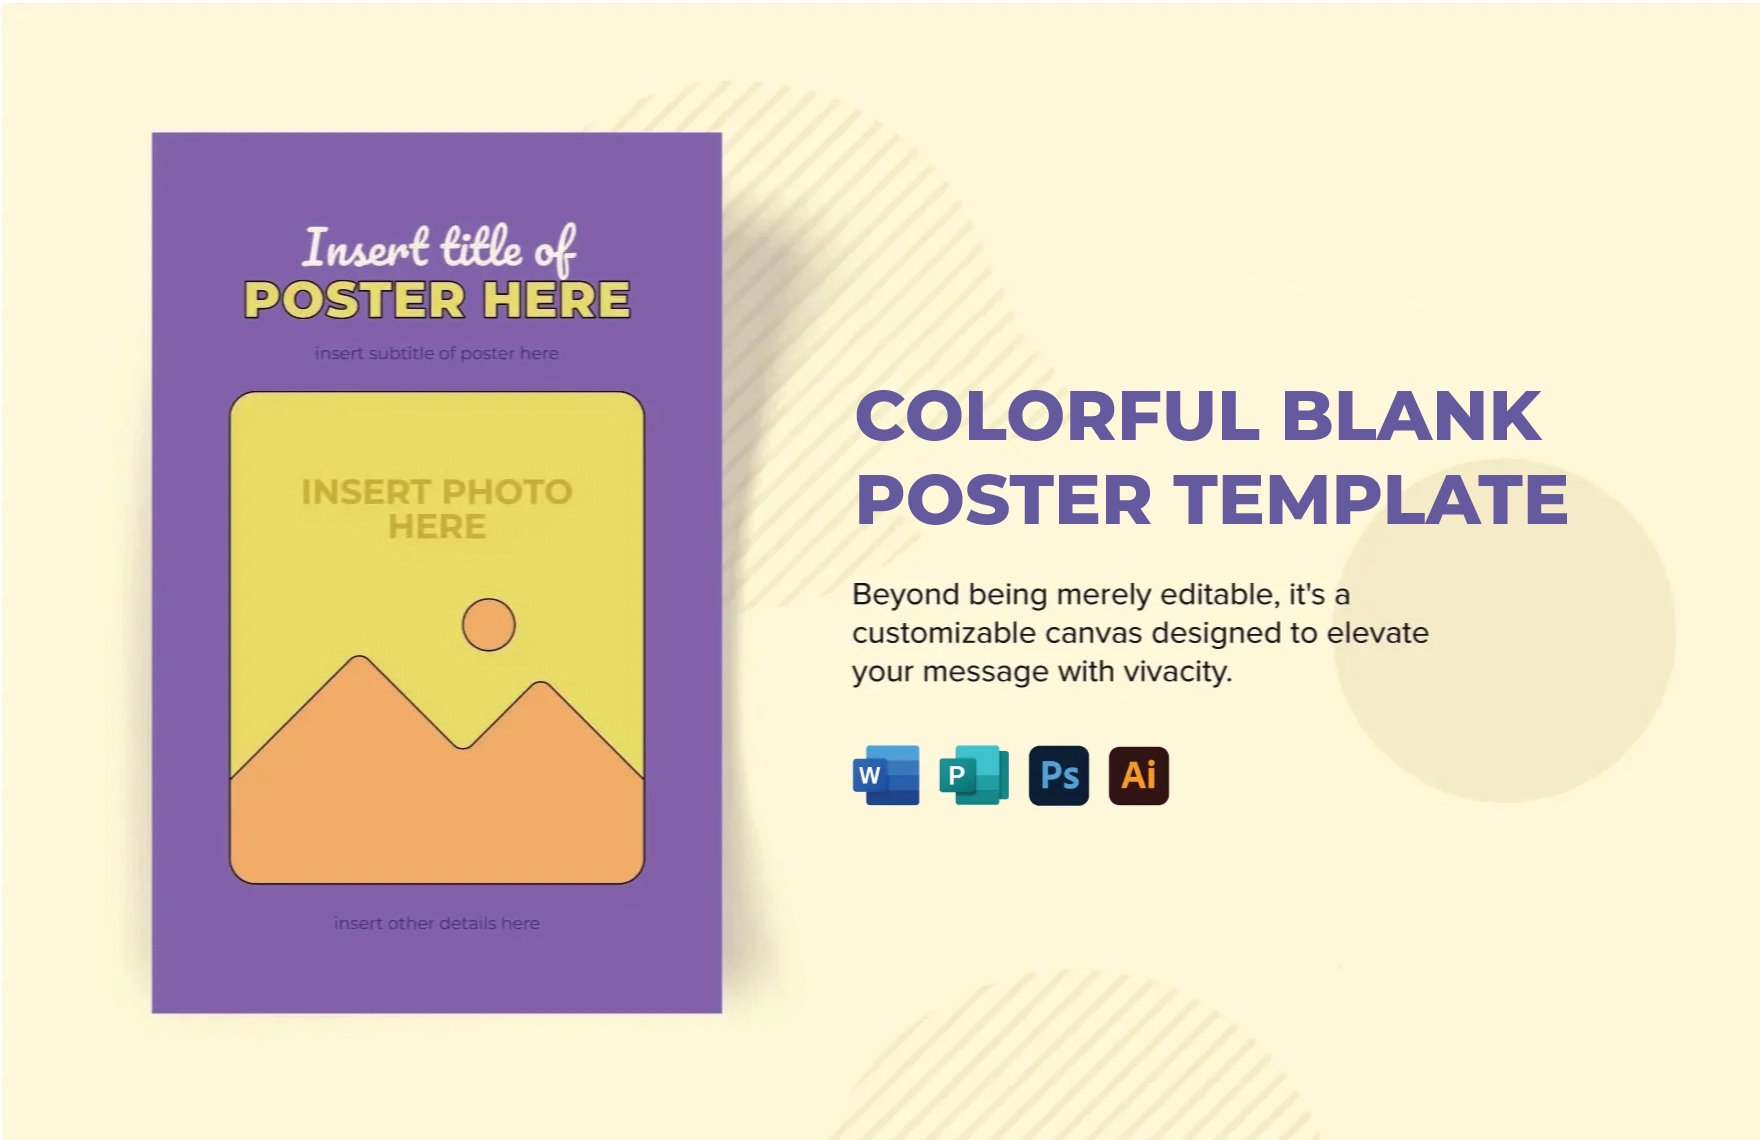 Colorful Blank Poster Template